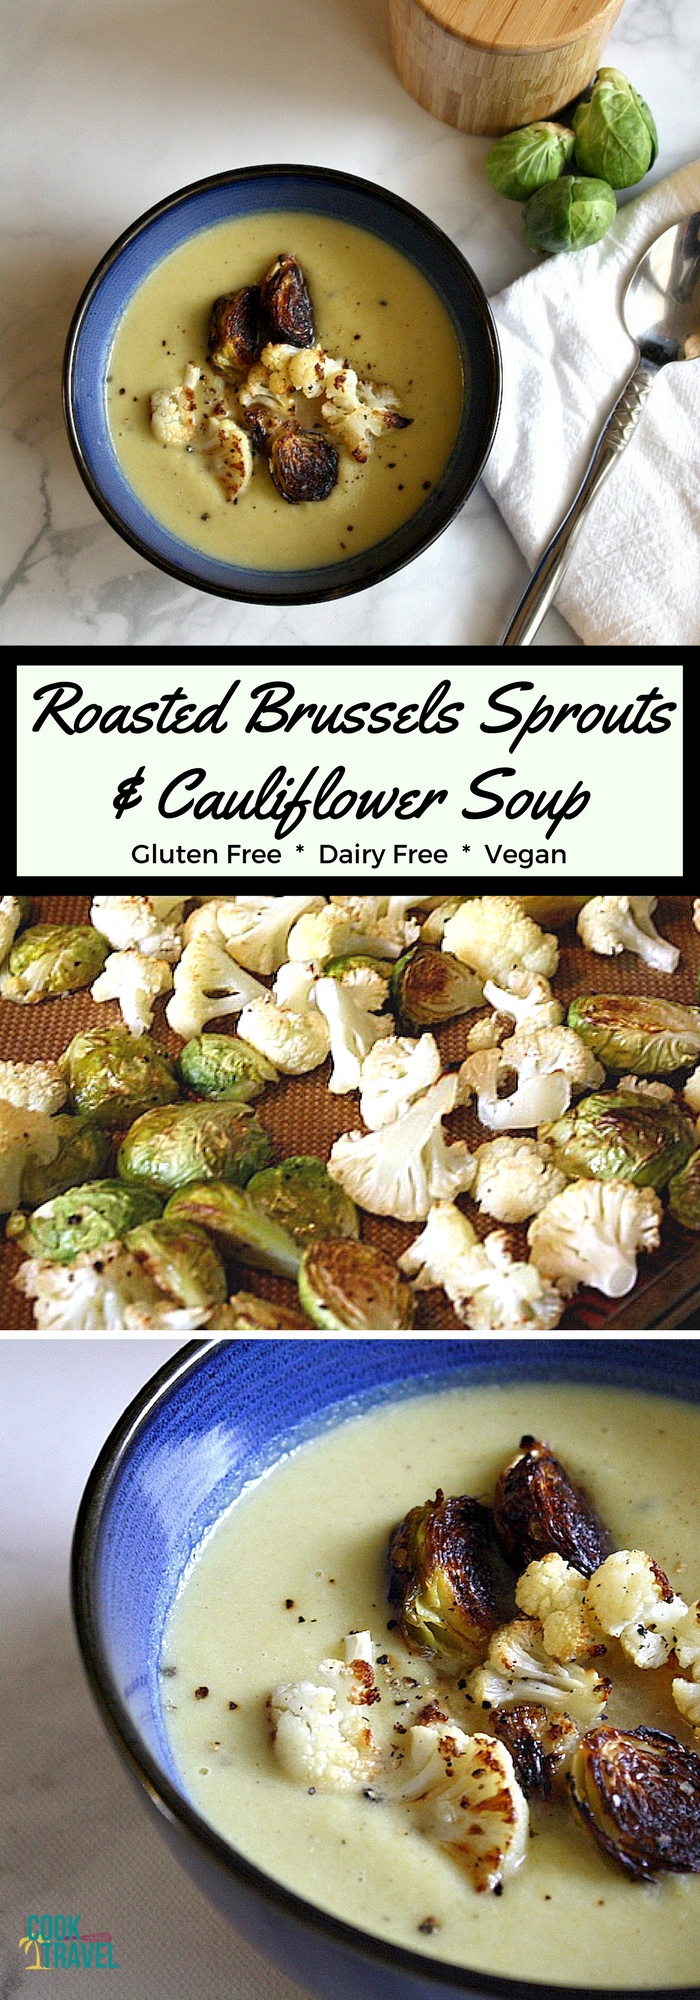 Roasted Brussels Sprouts Cauliflower Soup